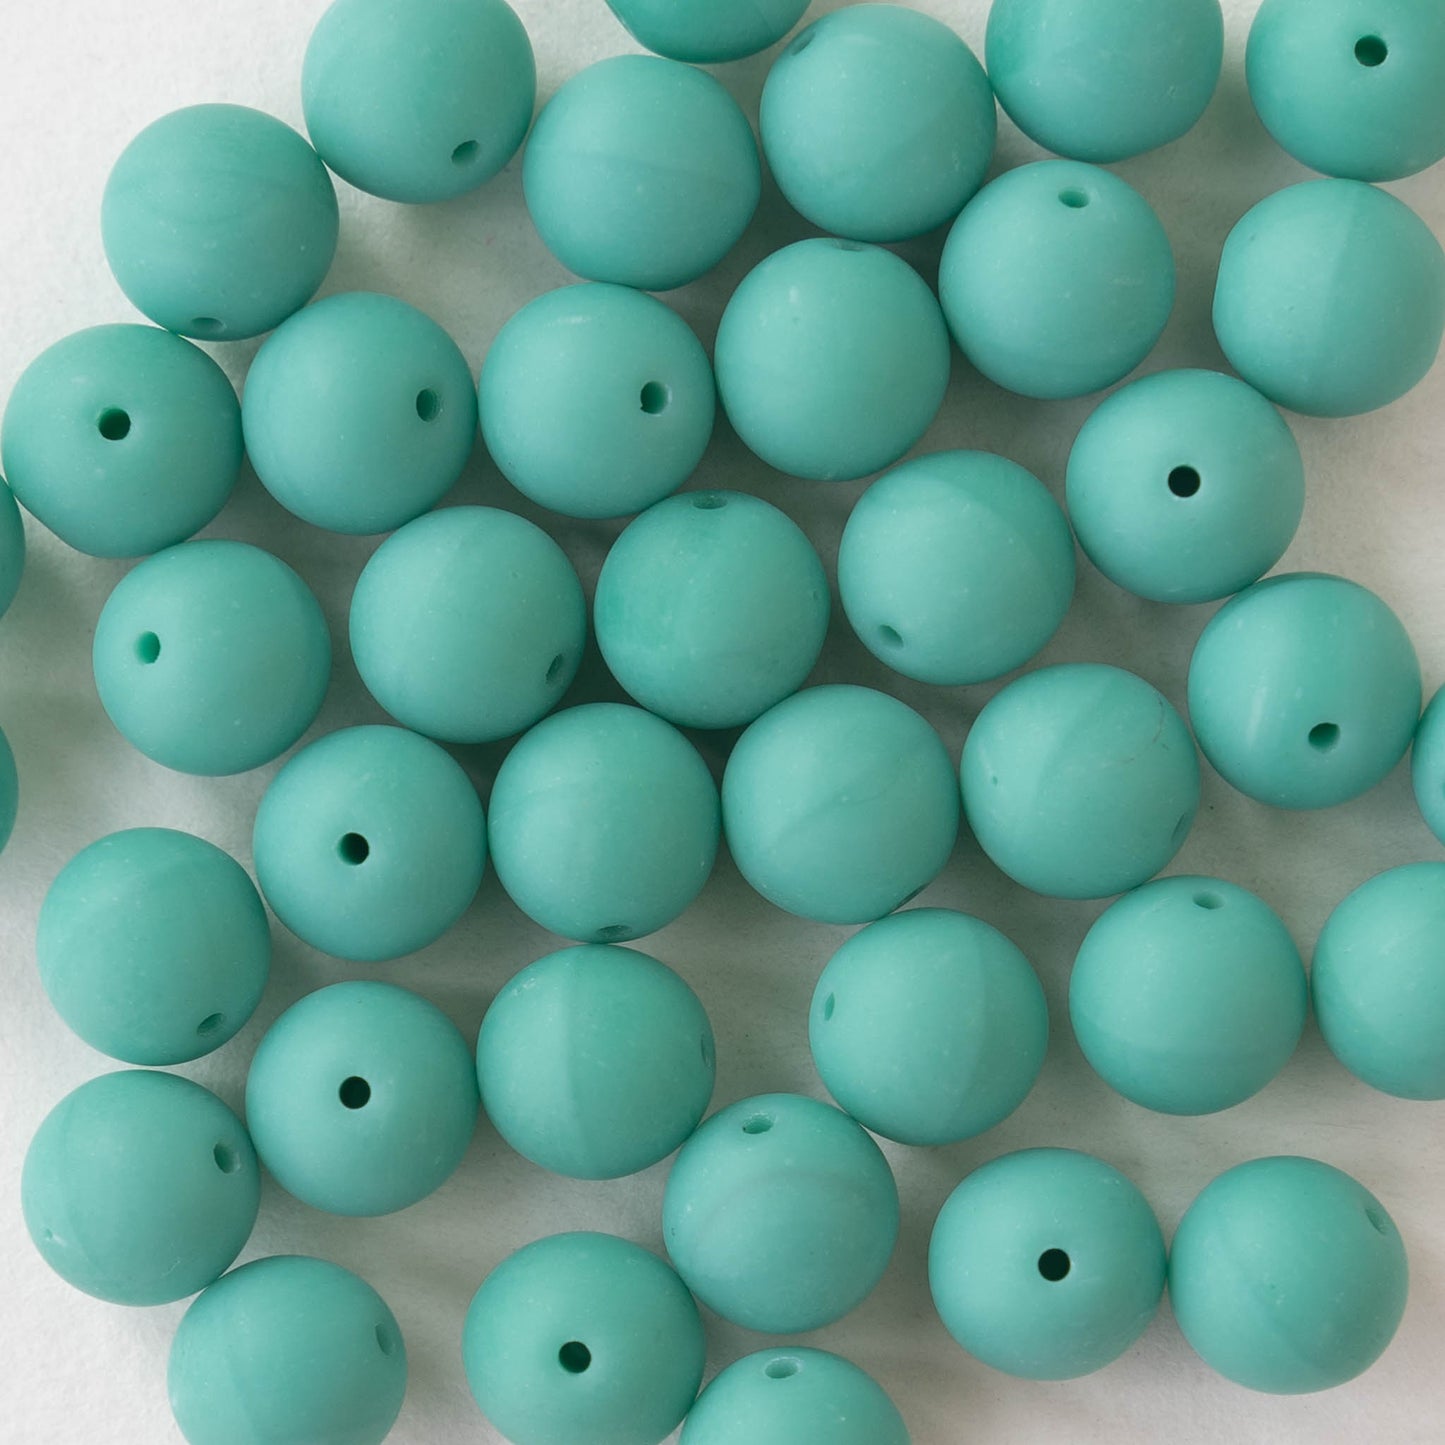 Load image into Gallery viewer, 8mm Round Glass Beads - Opaque Matte Green Turquoise- 25 Beads
